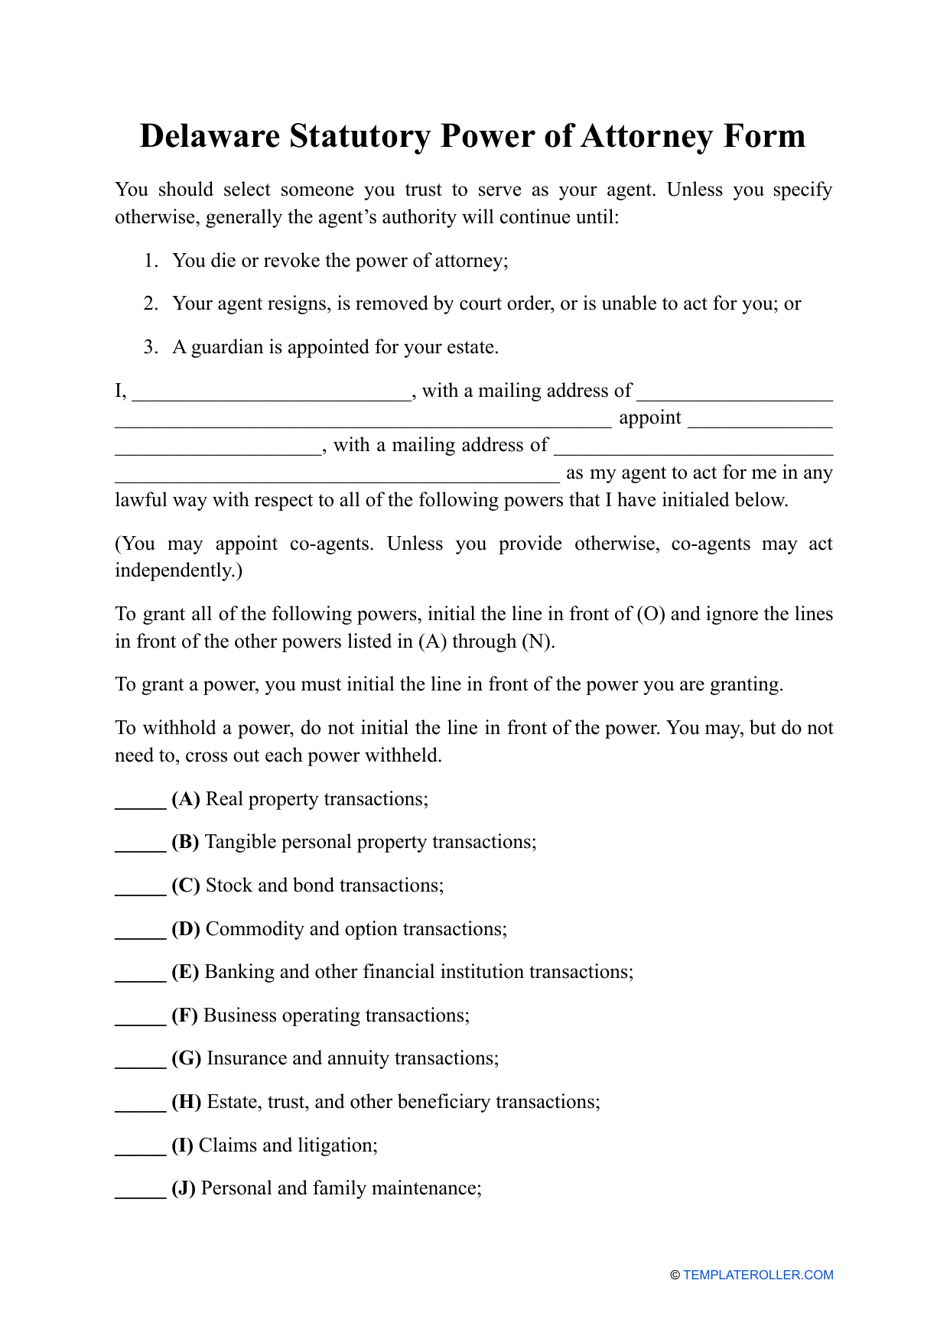 Statutory Power of Attorney Form - Delaware, Page 1